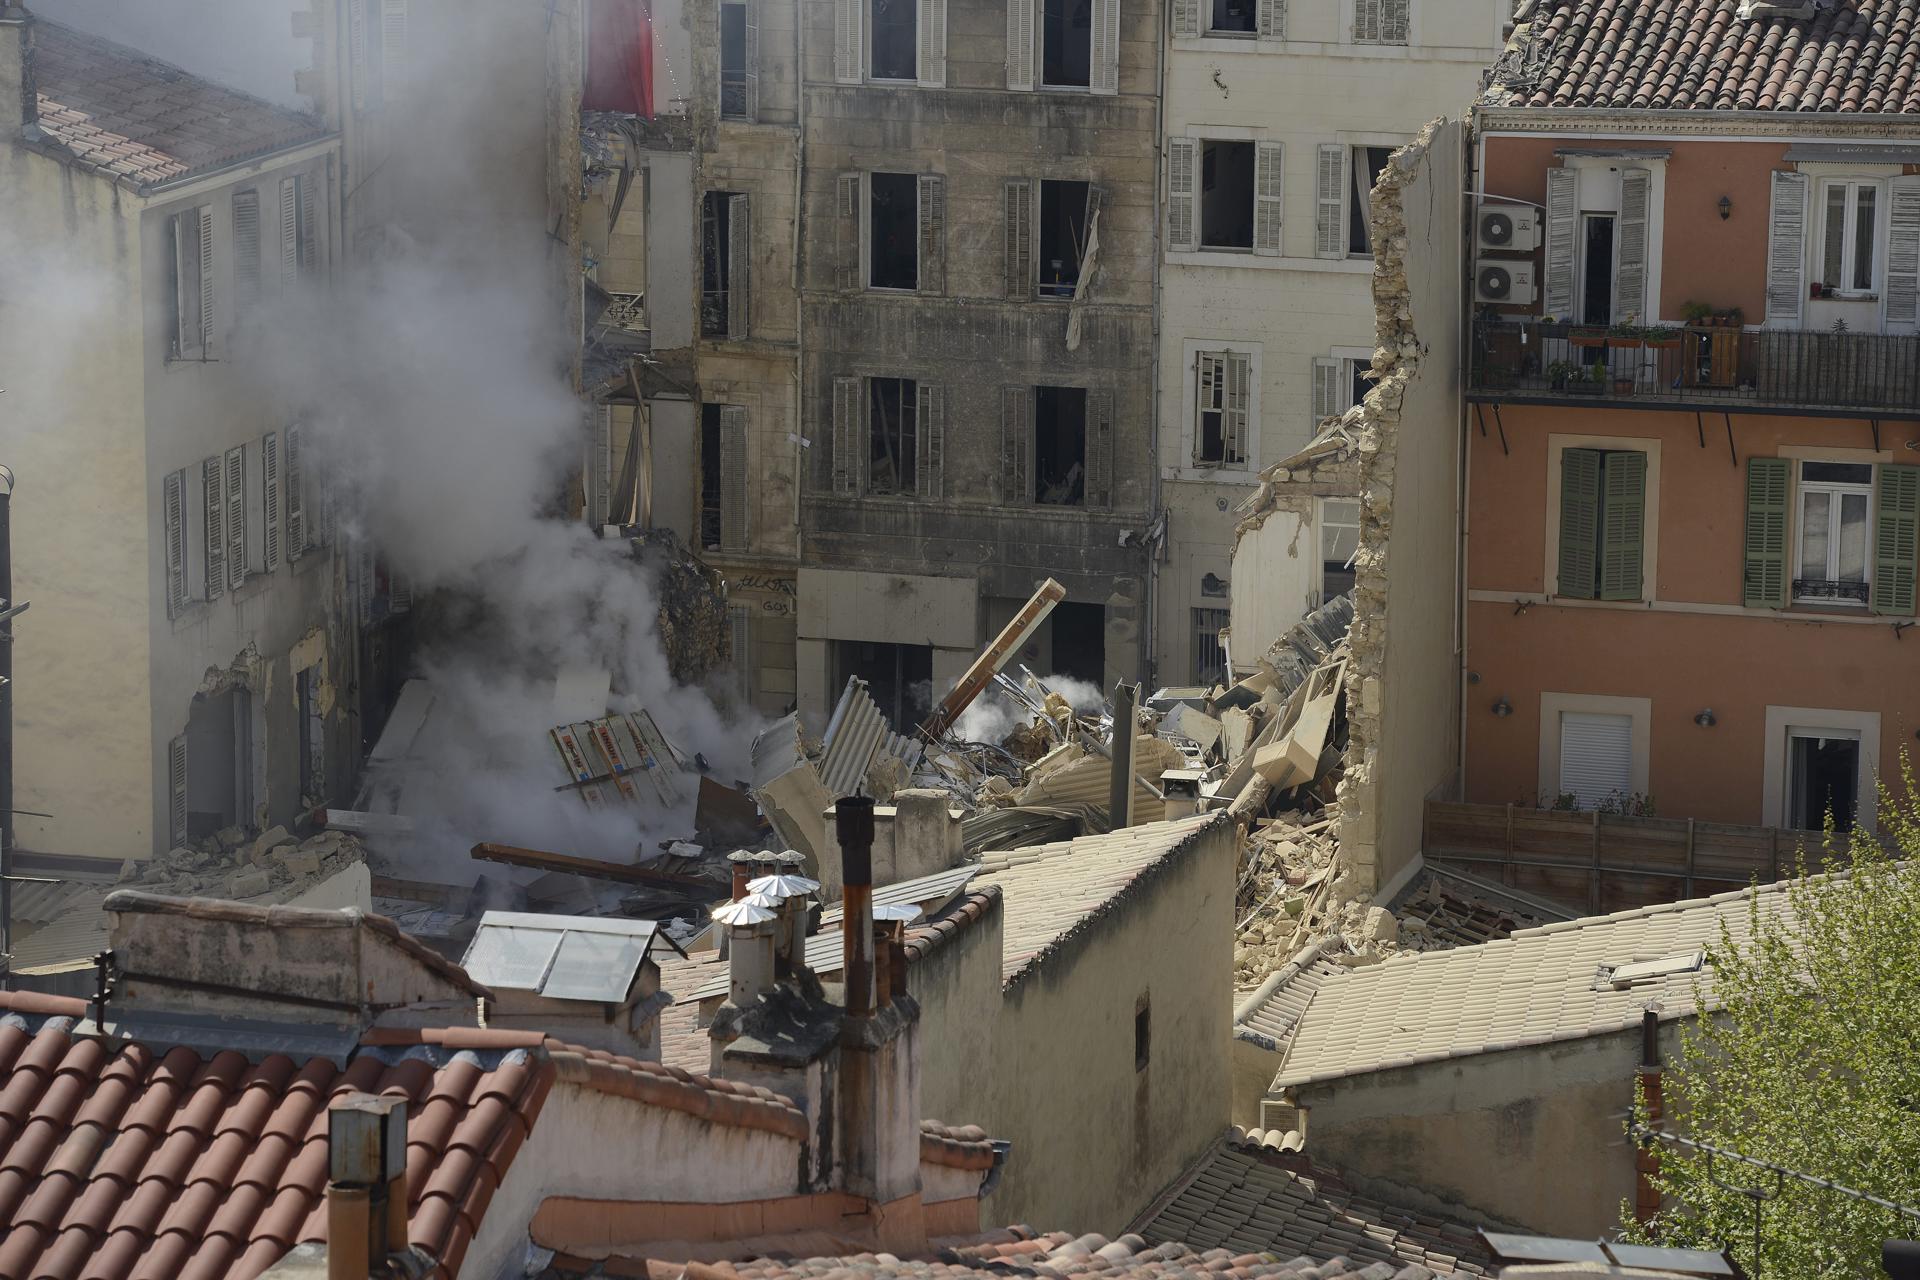 Marseille (France), 09/04/2023.- The site of an explosion leading to the collapse of at least one building in Marseille, France, 09 April 2023. Several people were injured, according to the police and the cause is still unknown. (Francia, Marsella) EFE/EPA/FRANCK PENNANT MAXPPP OUT, MANDATORY CREDIT PHOTOPQR/LA PROVENCE/FRANCK PENNANT